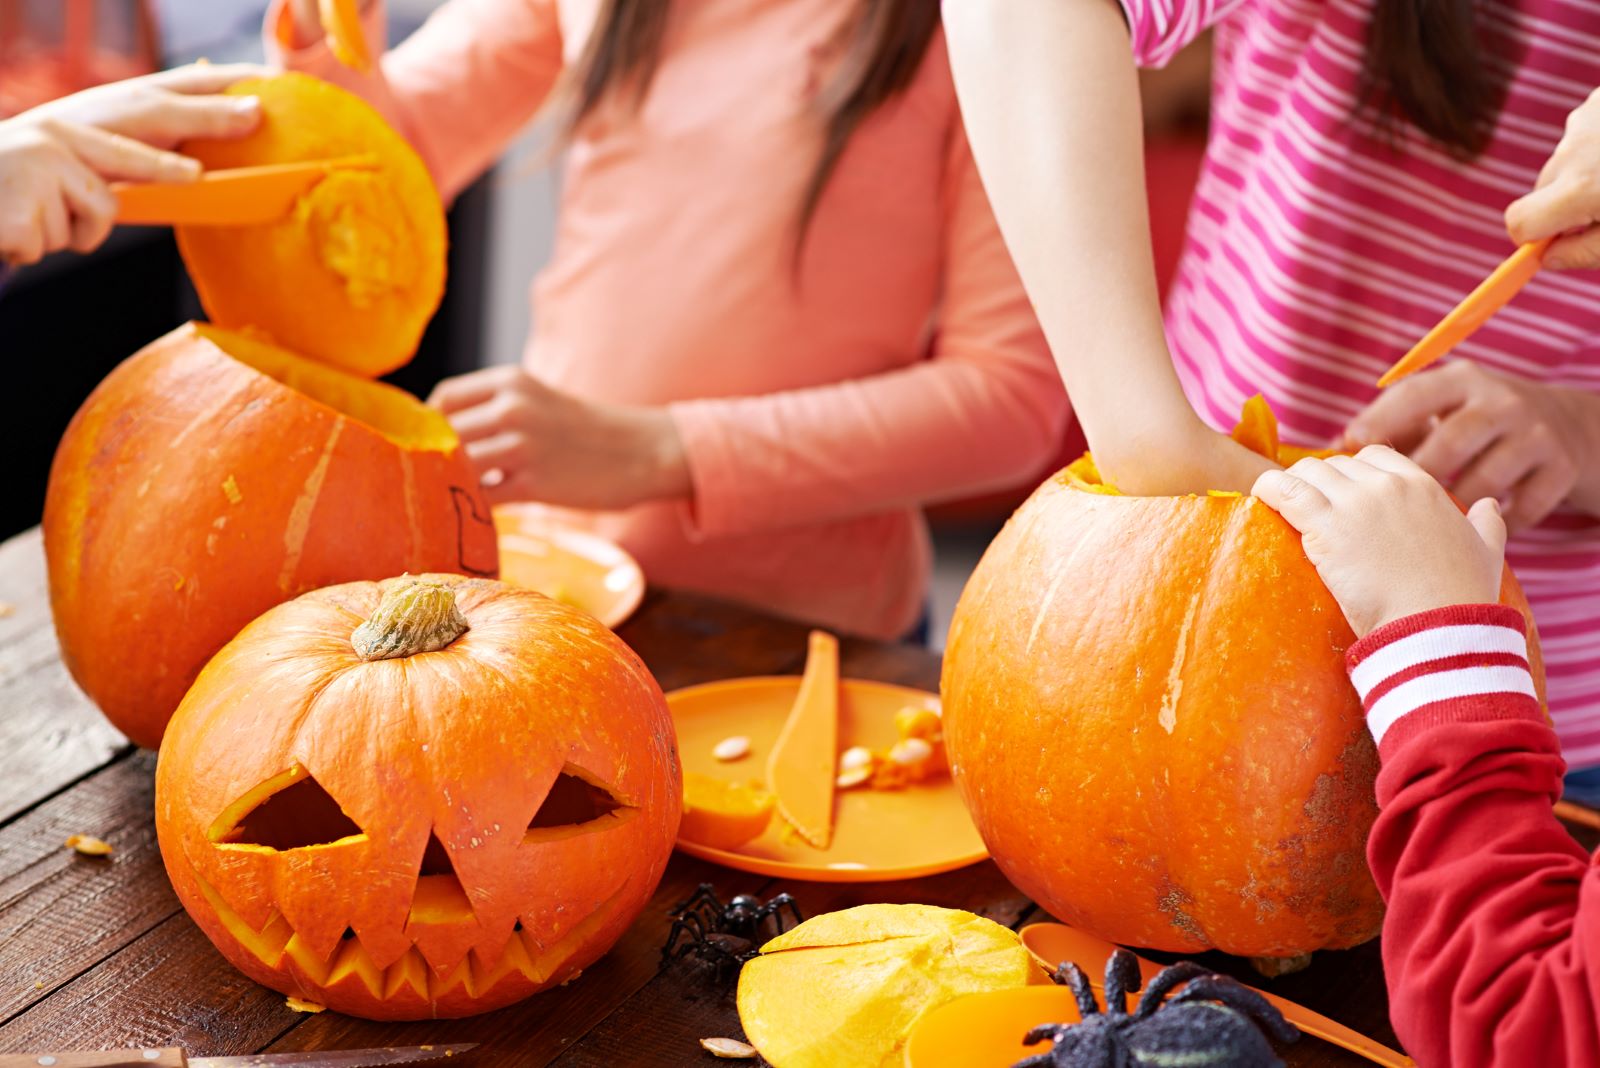 Two Simple Tips to Avoid Injuries While Pumpkin Carving